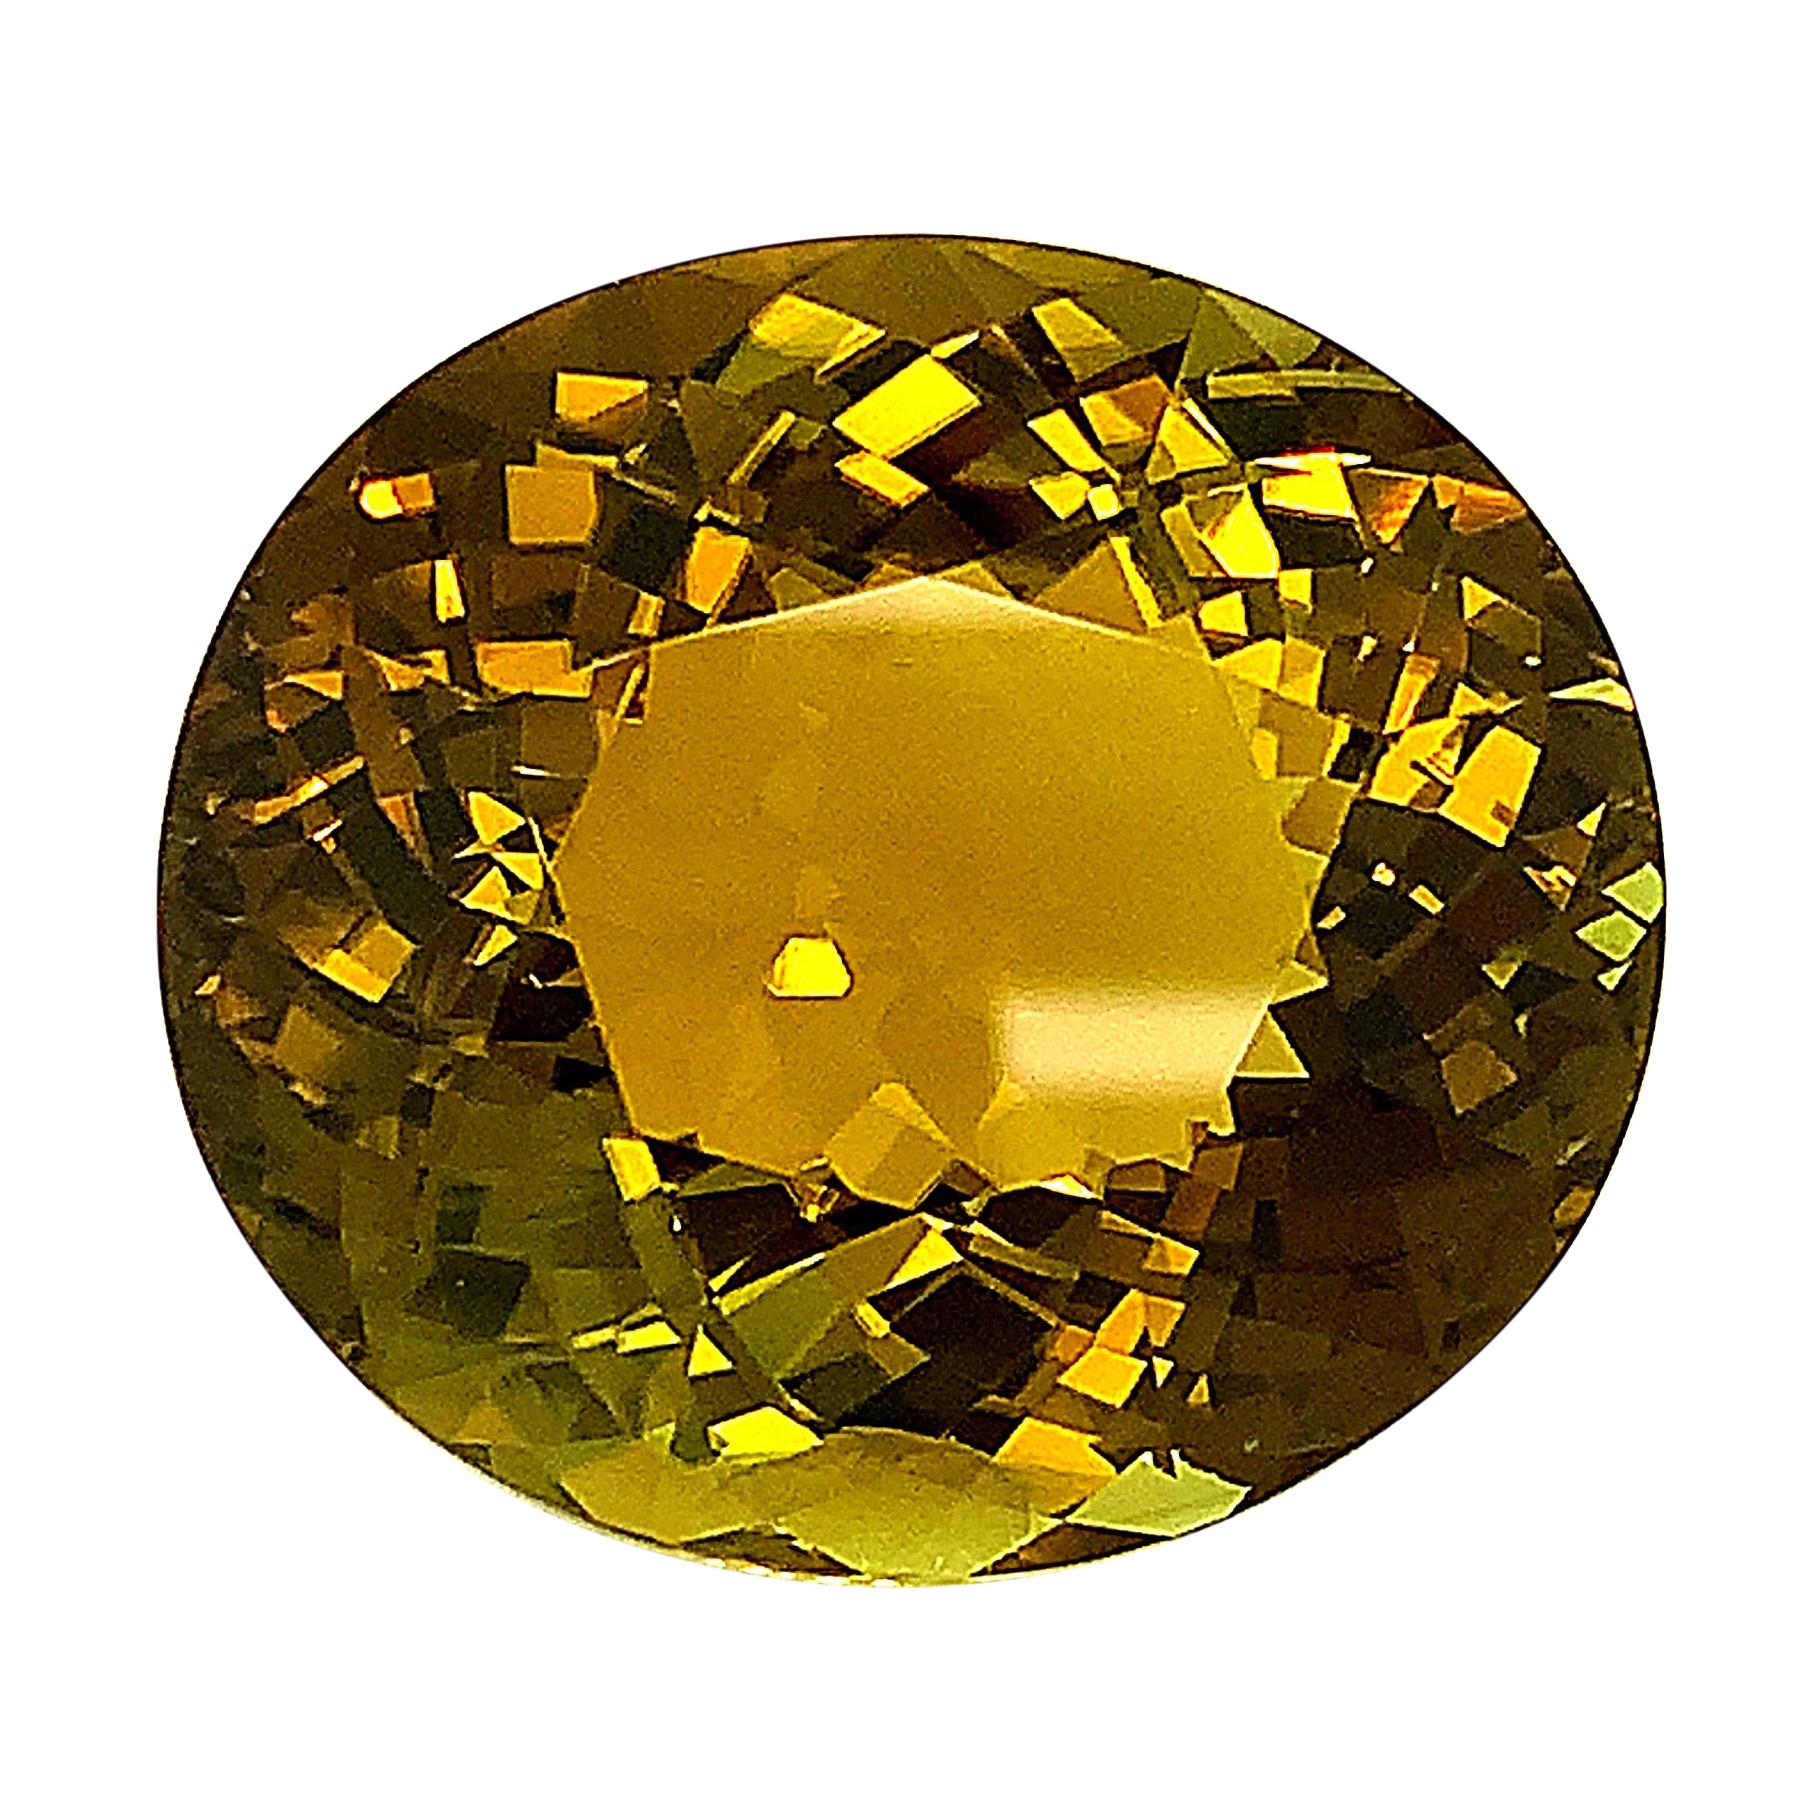  79.78 Carat Golden Olive Tourmaline Oval, Loose Gemstone, GIA Certified ...A